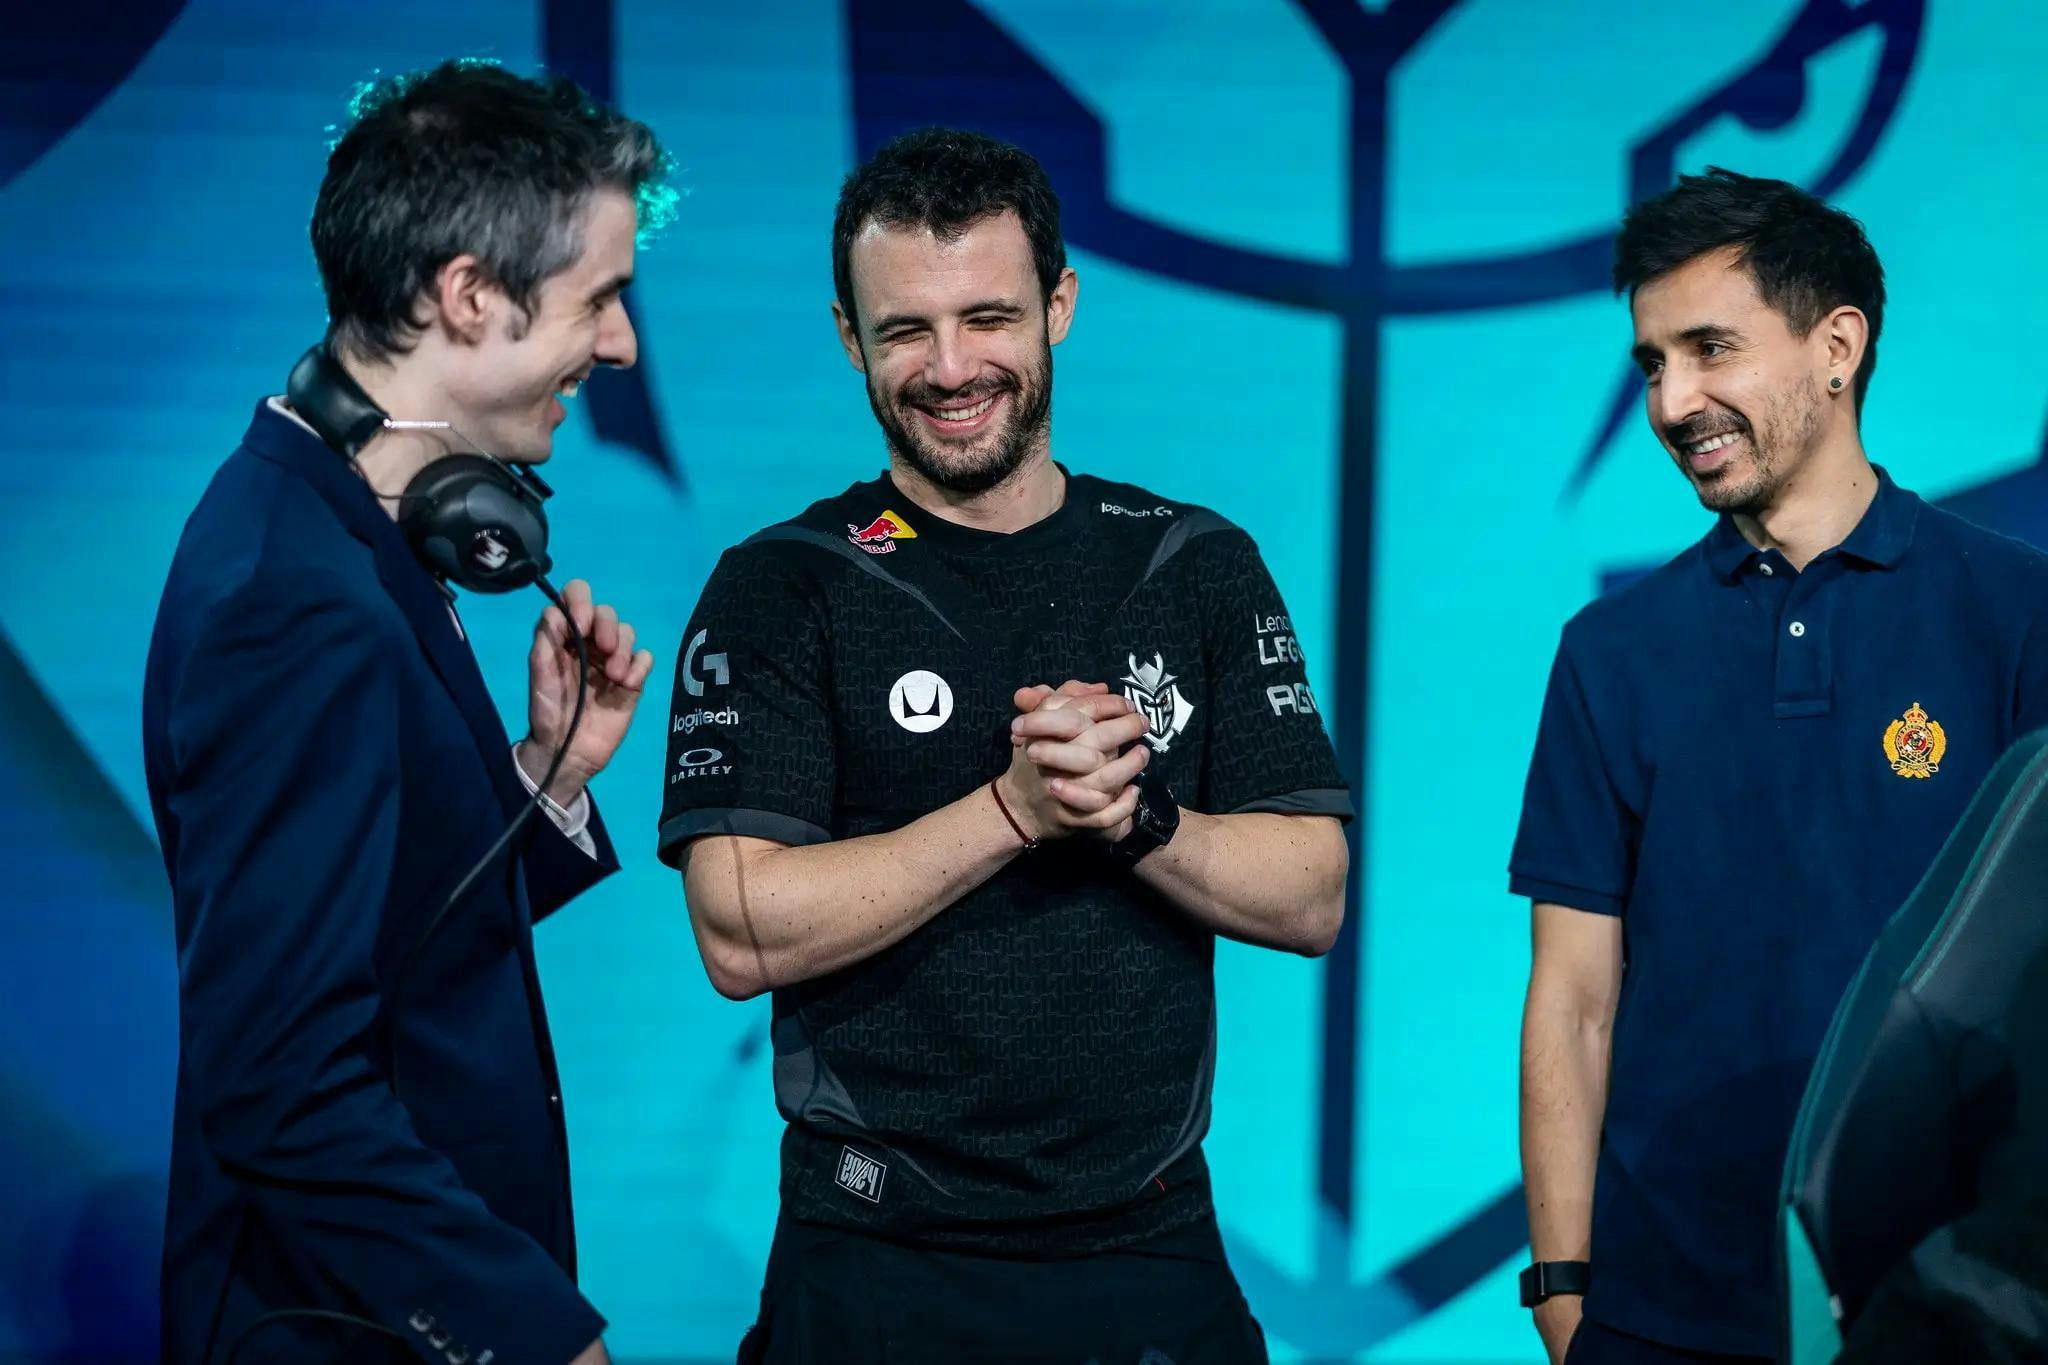 Romain, Dylan Falco, and Isma, on stage in Berlin. Credit: Wojciech Wandzel/Riot Games